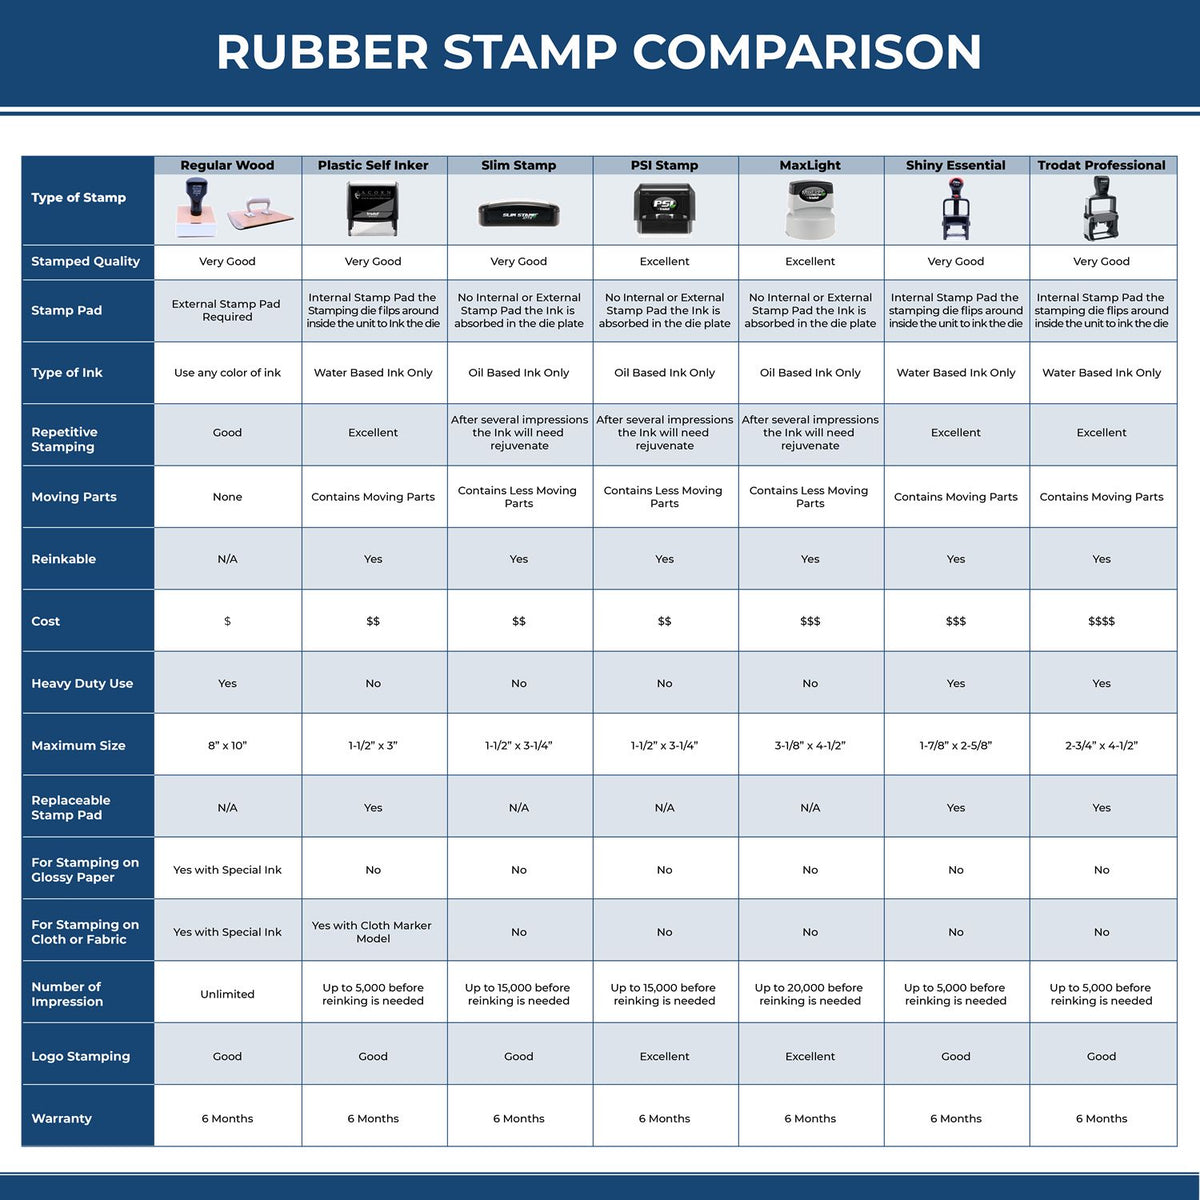 A comparison chart for the different types of mount models available for the Super Slim Florida Notary Public Stamp.